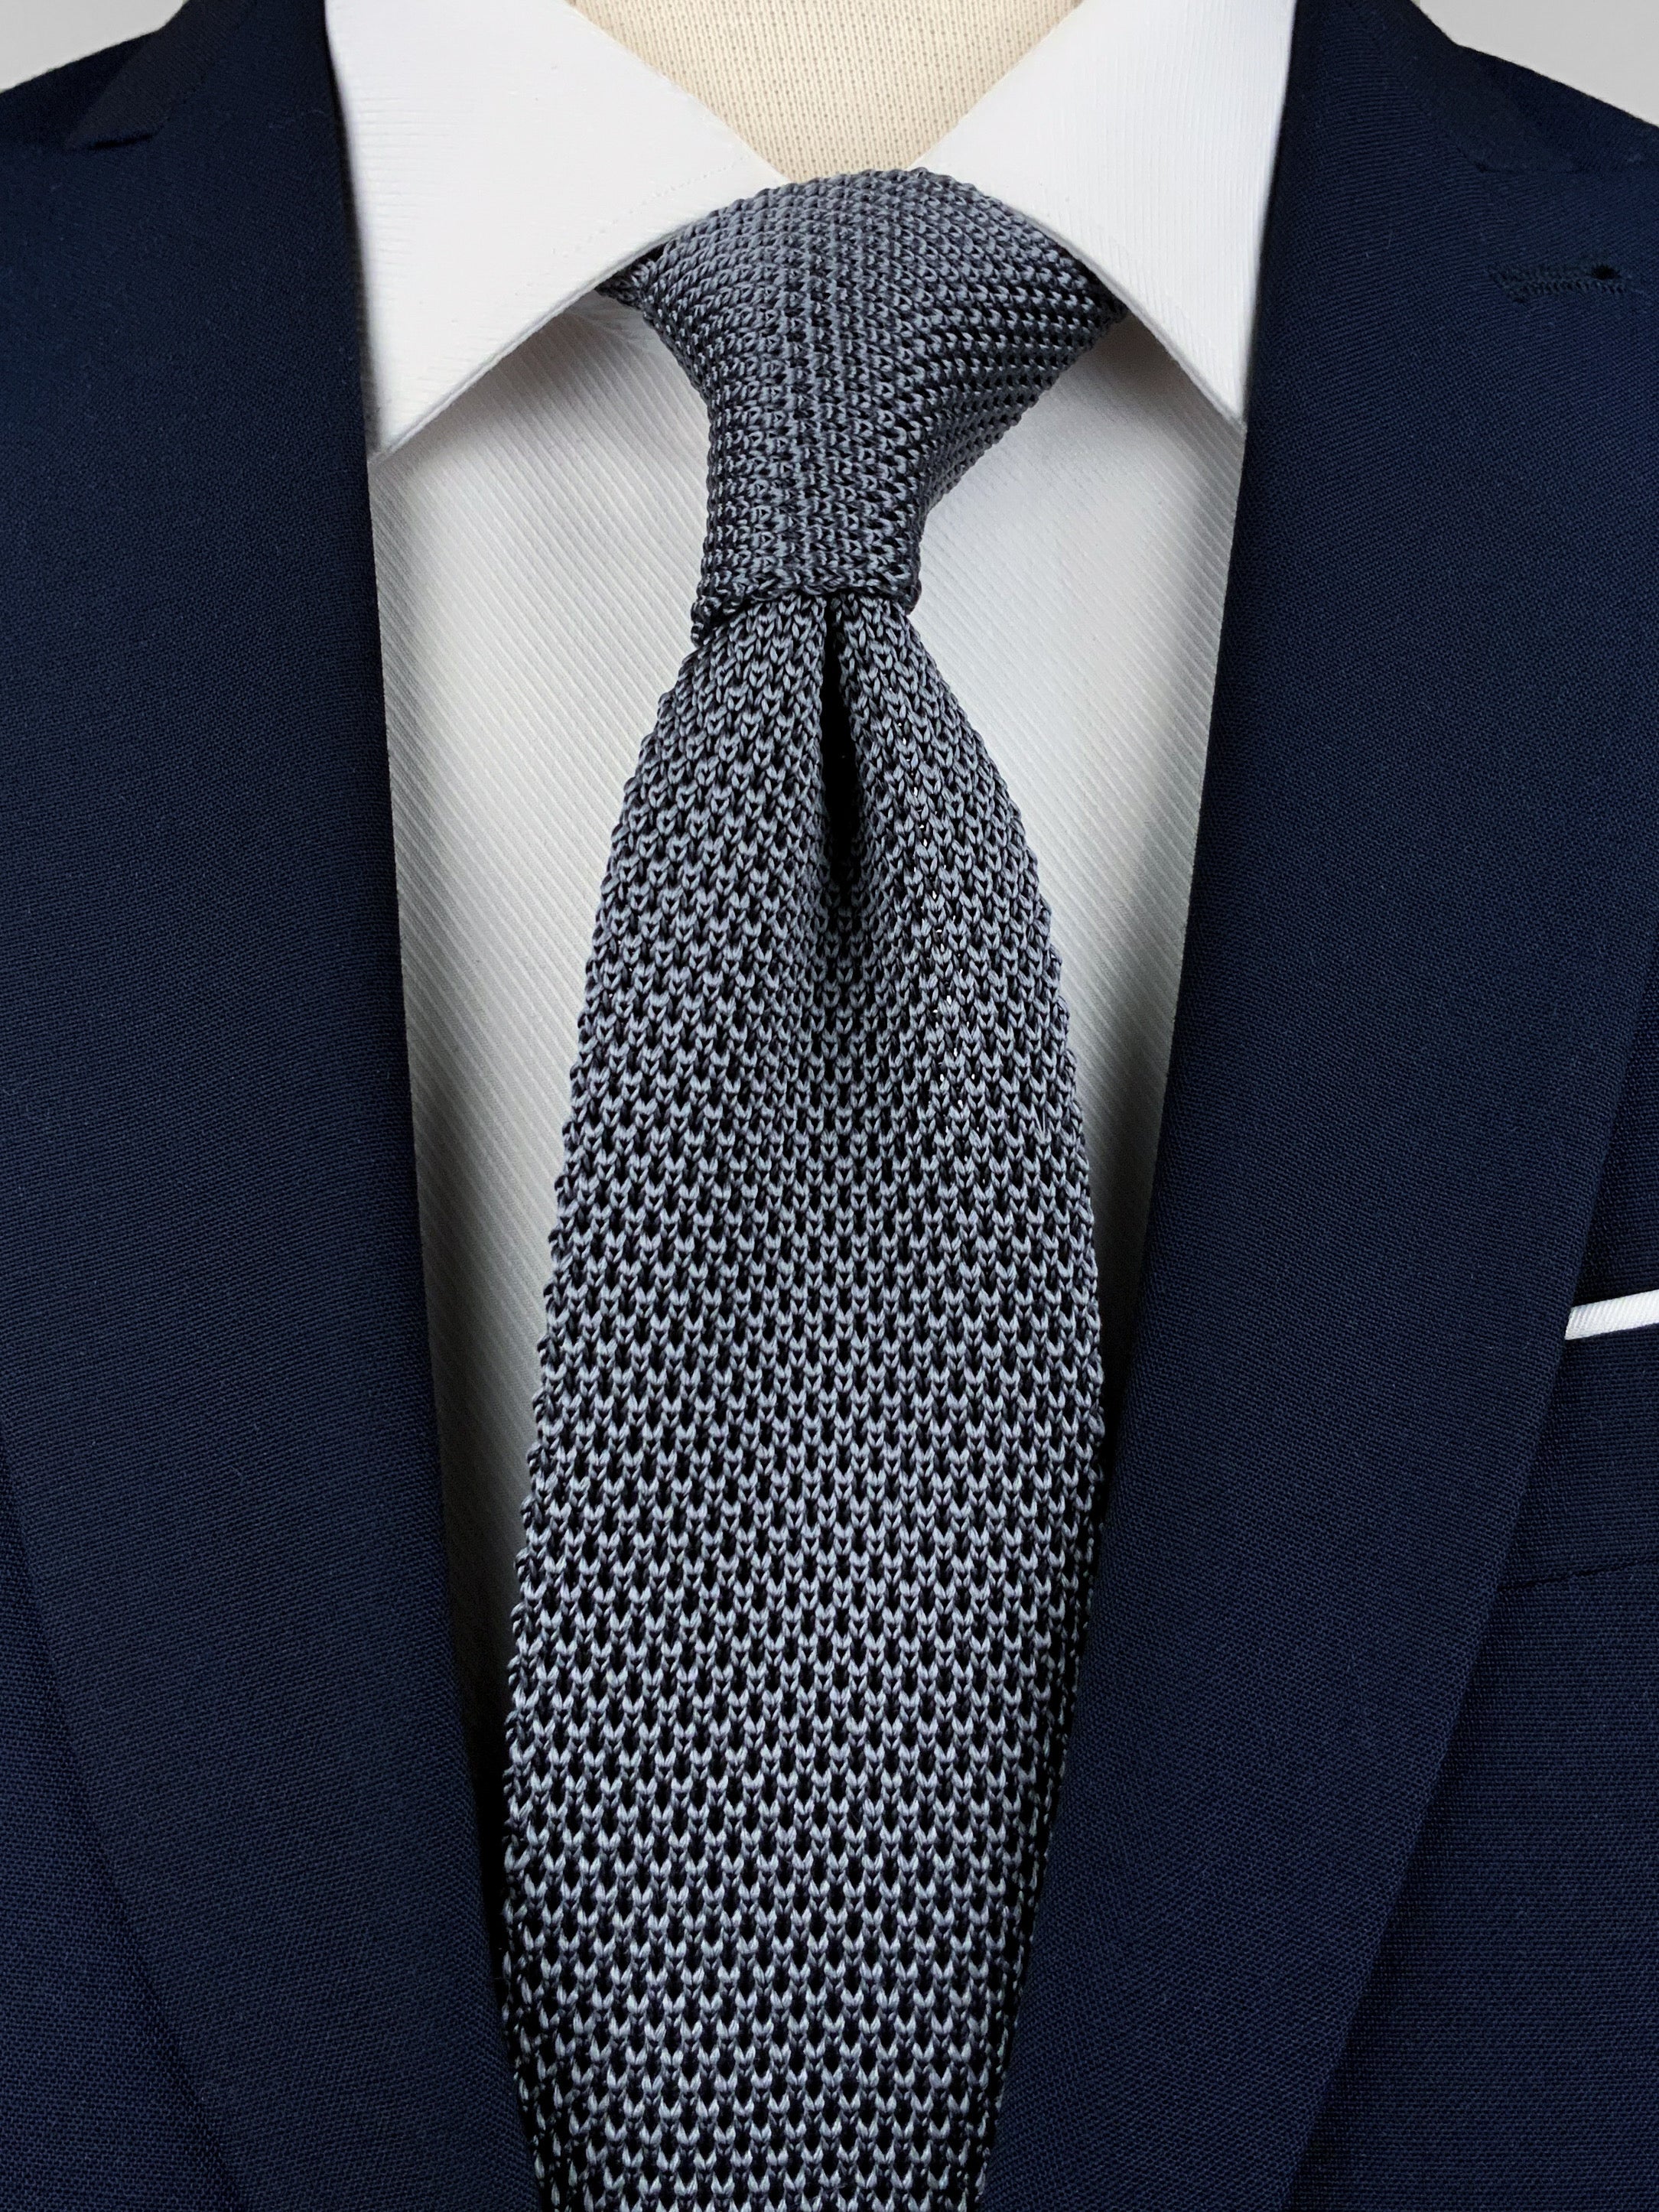 Dark grey mulberry silk knitted tie worn with a white shirt and a navy blue suit